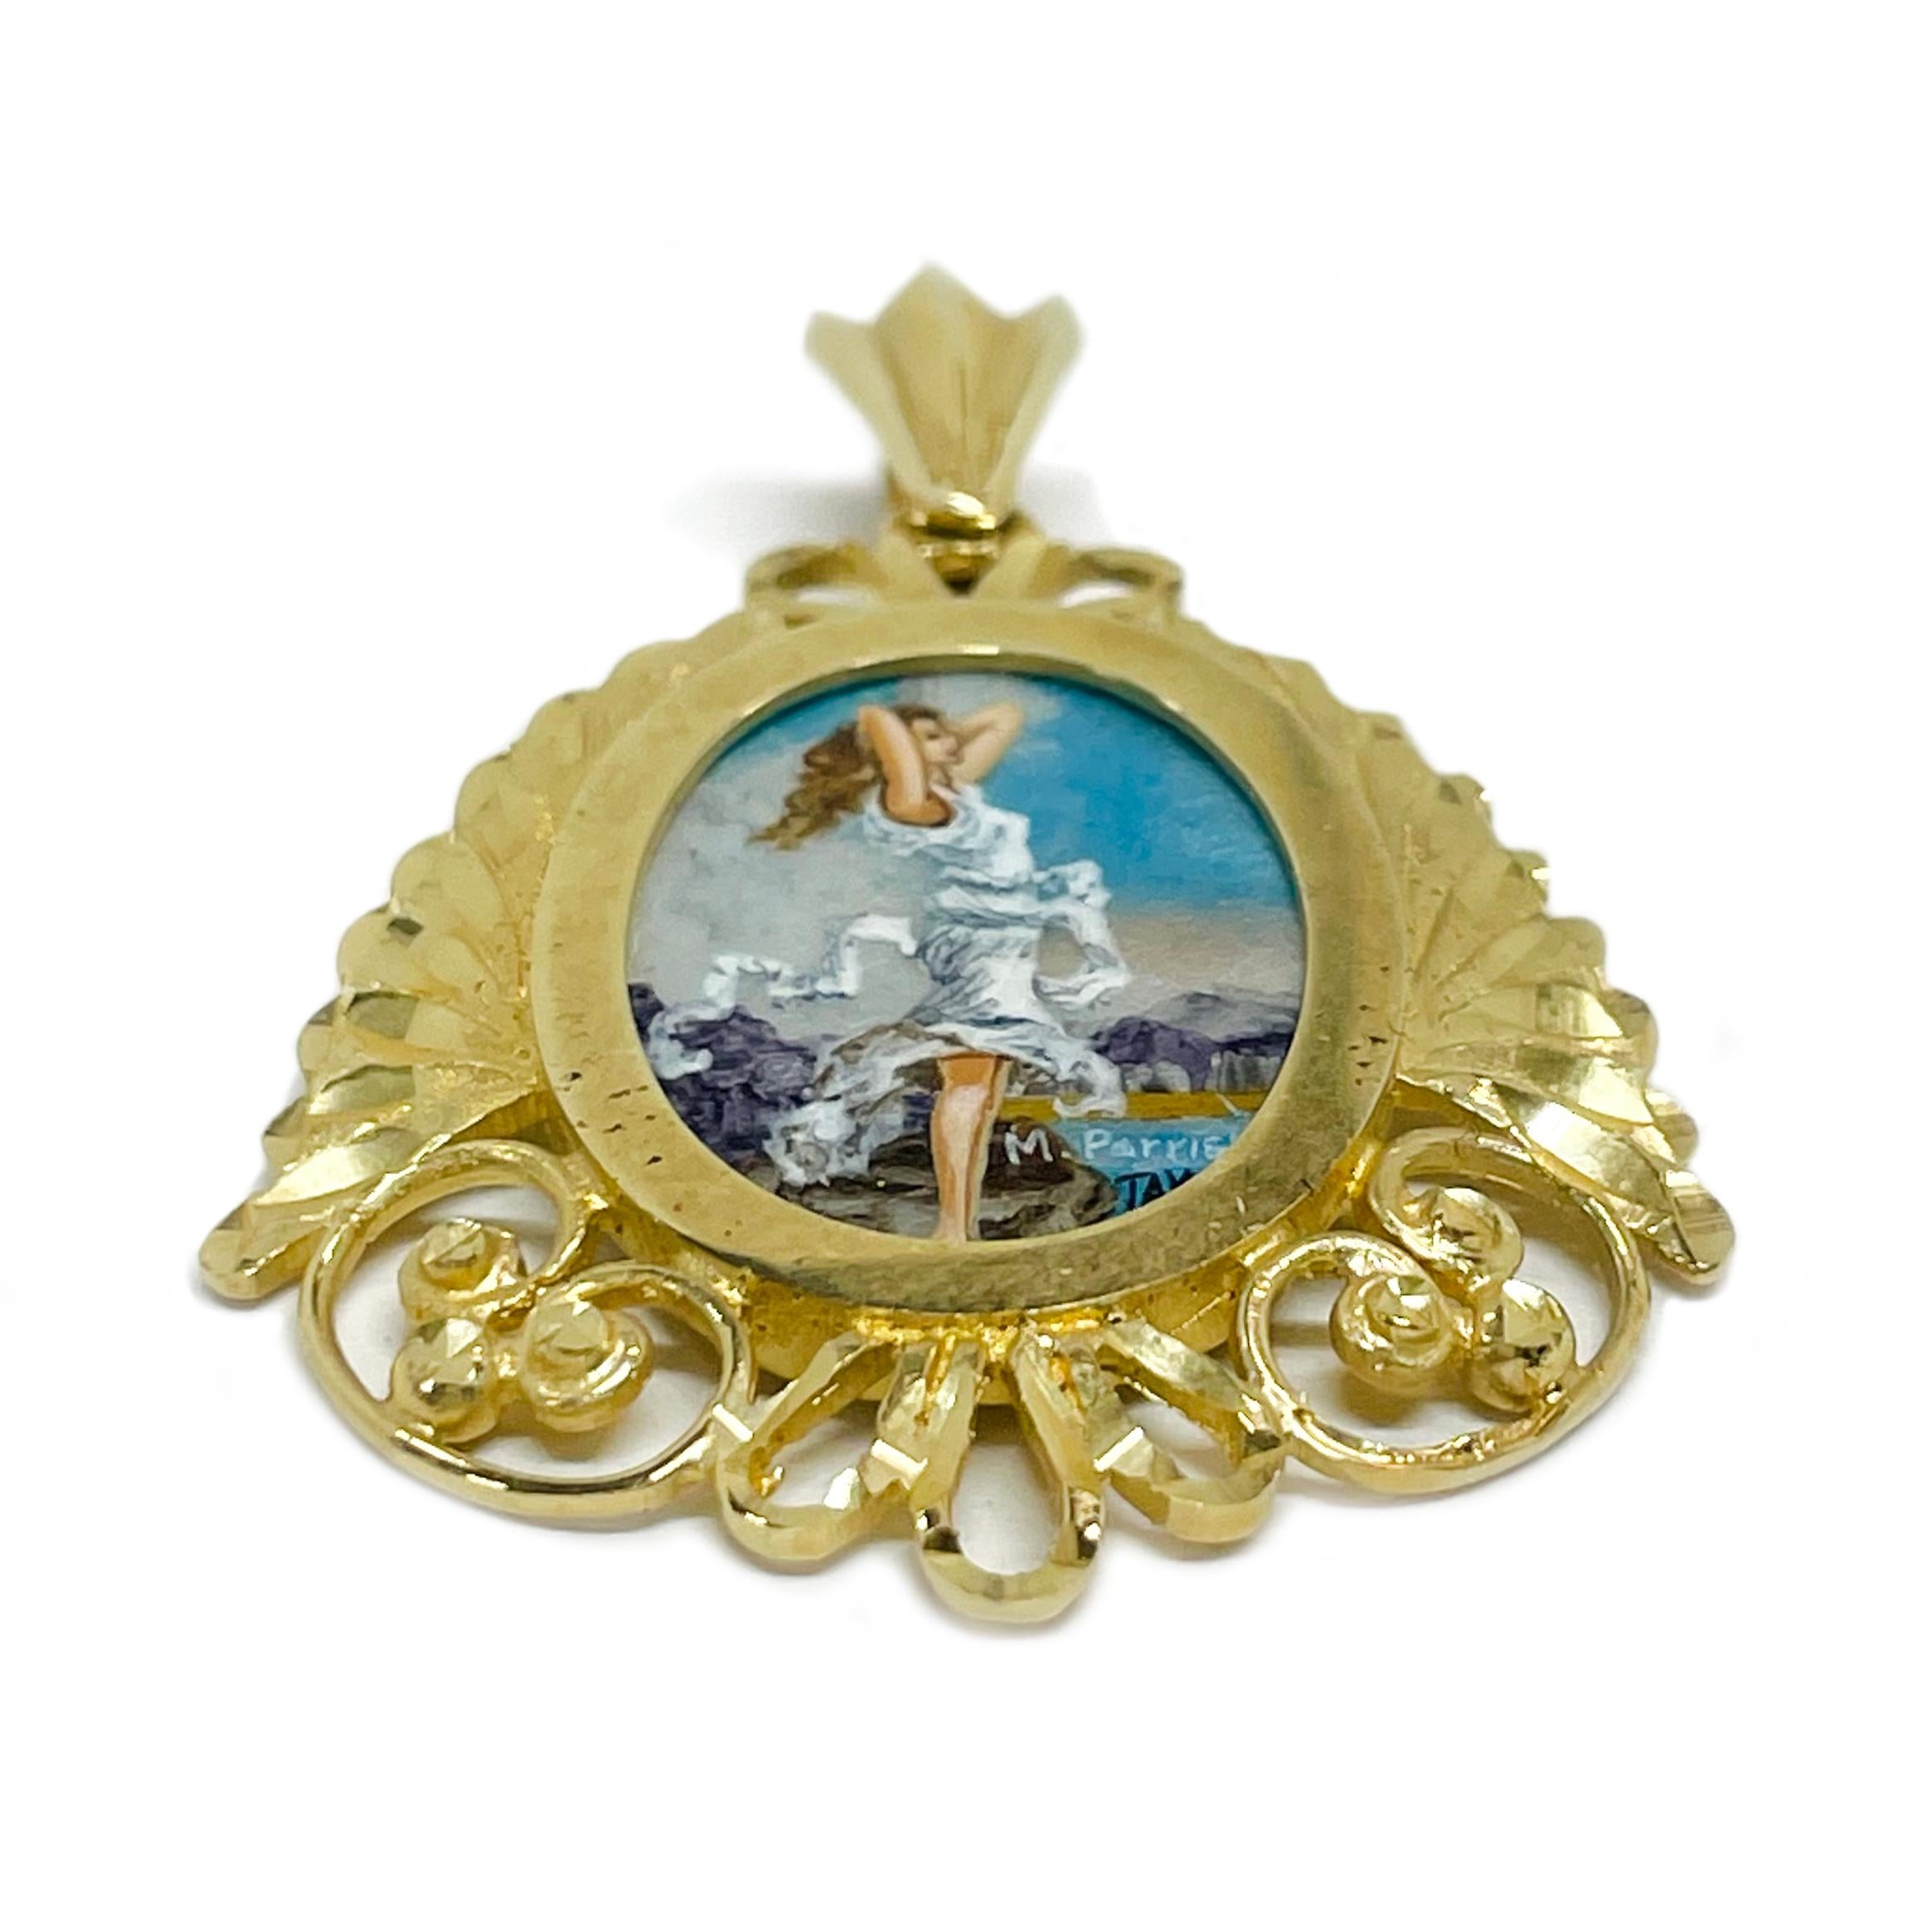 14 Karat Yellow Gold 'Ecstasy' Hand Painted Mother of Pearl Pendant. Absolutely lovely recreated Maxfield Parrish's 'Ecstasy' painting. The miniature painting is set in a 14 karat gold oval frame with diamond-cut details. The painting is signed by